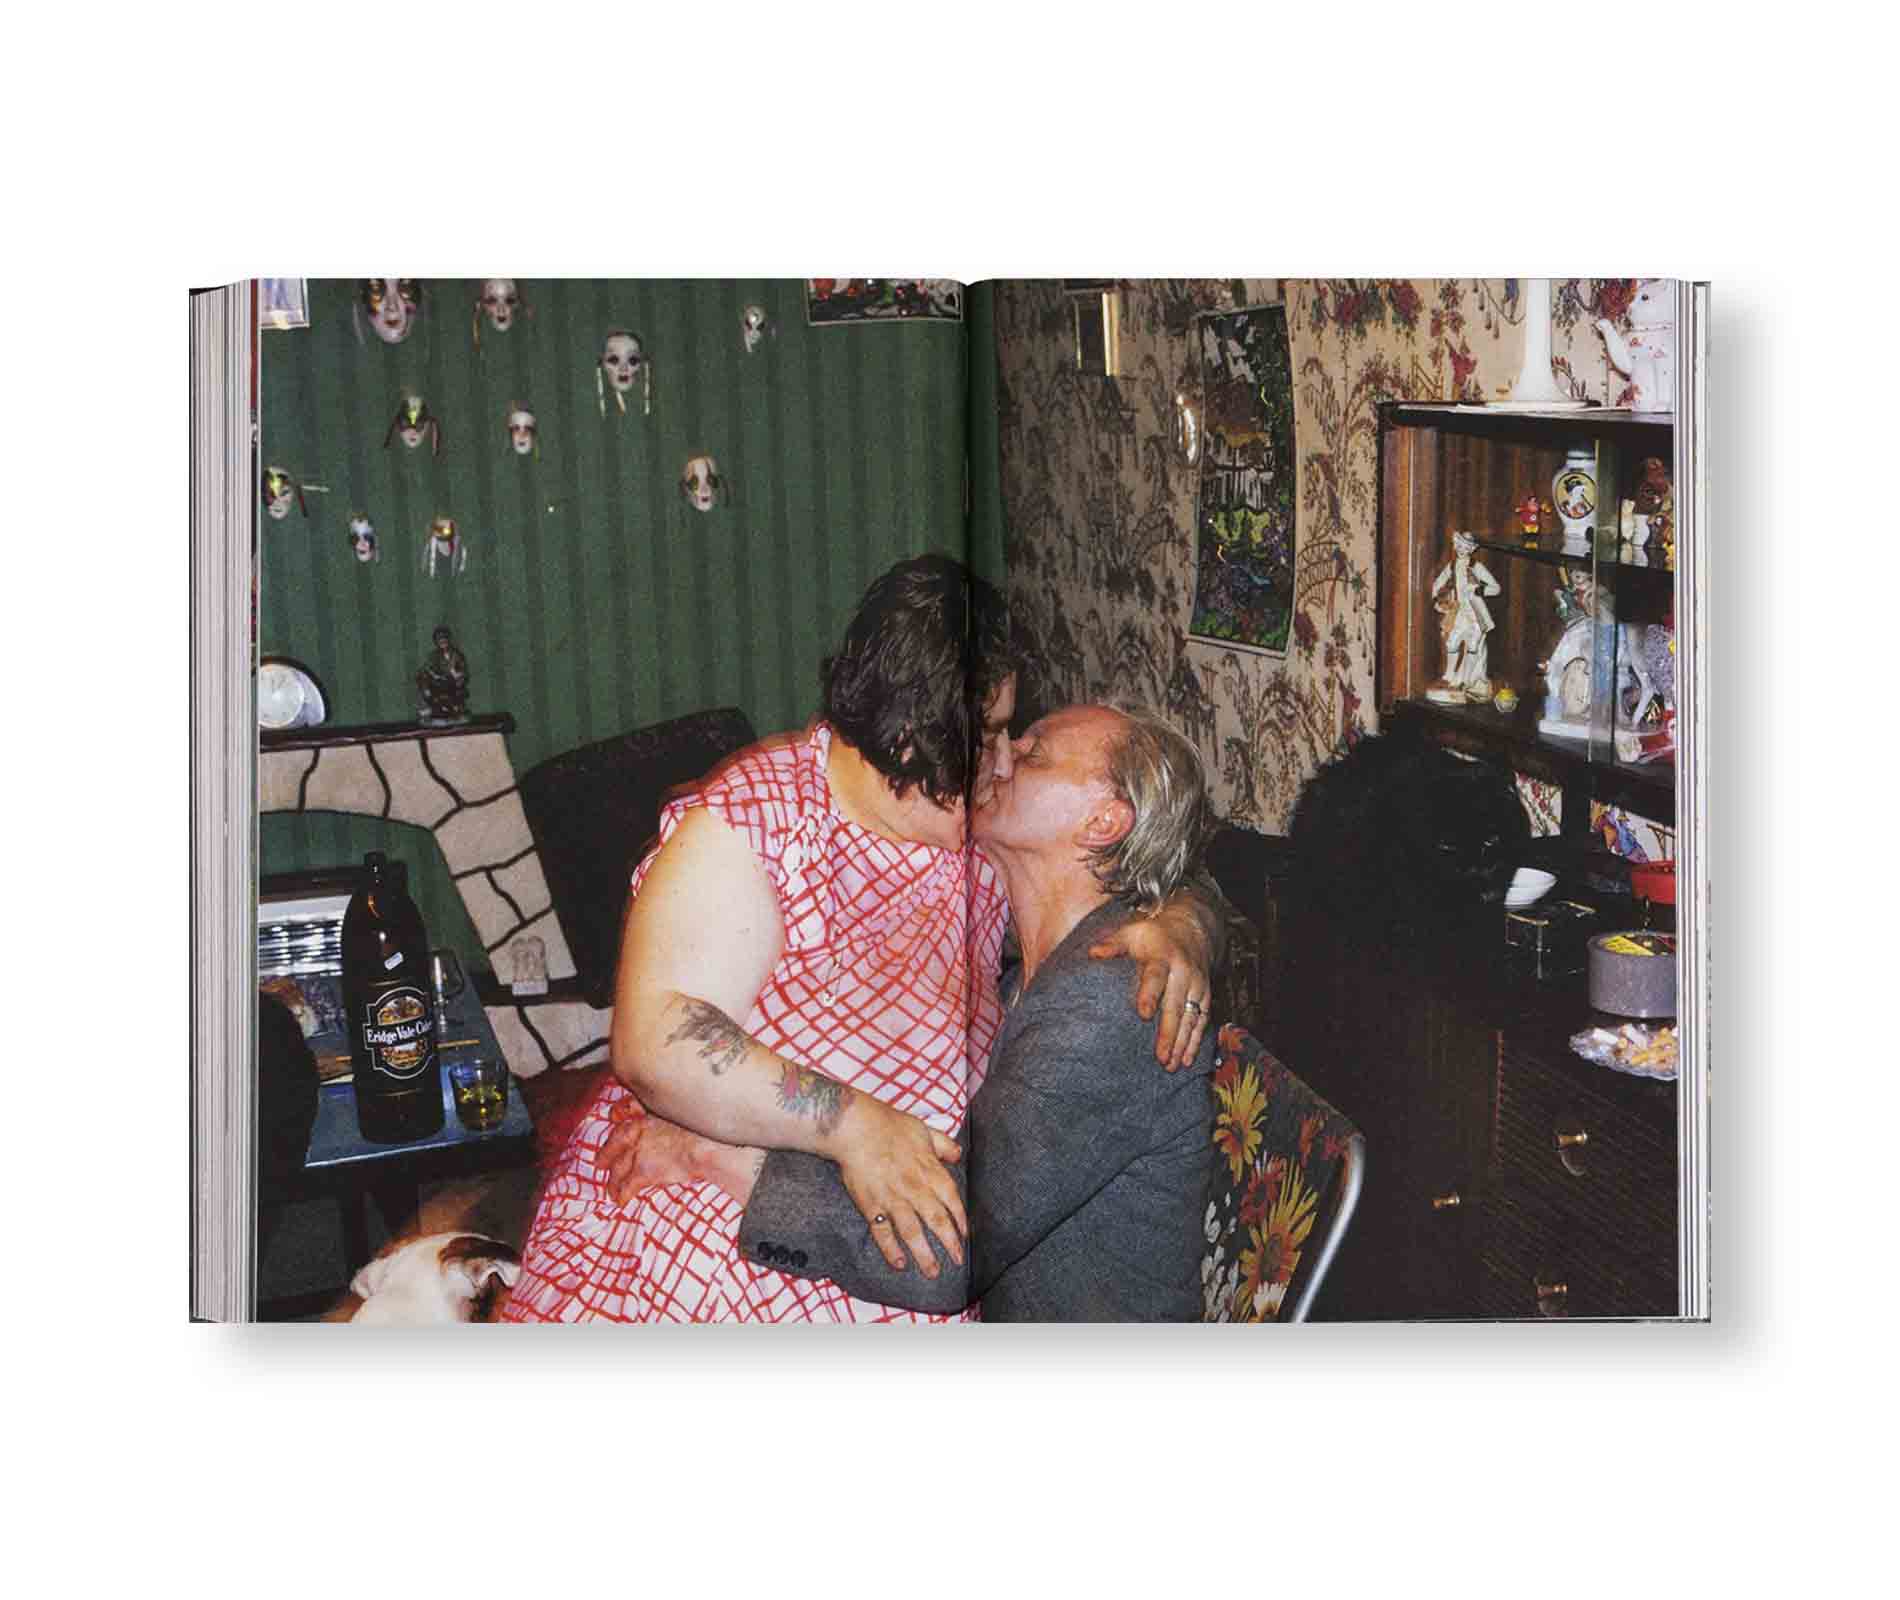 RAY’S A LAUGH by Richard Billingham [SIGNED]